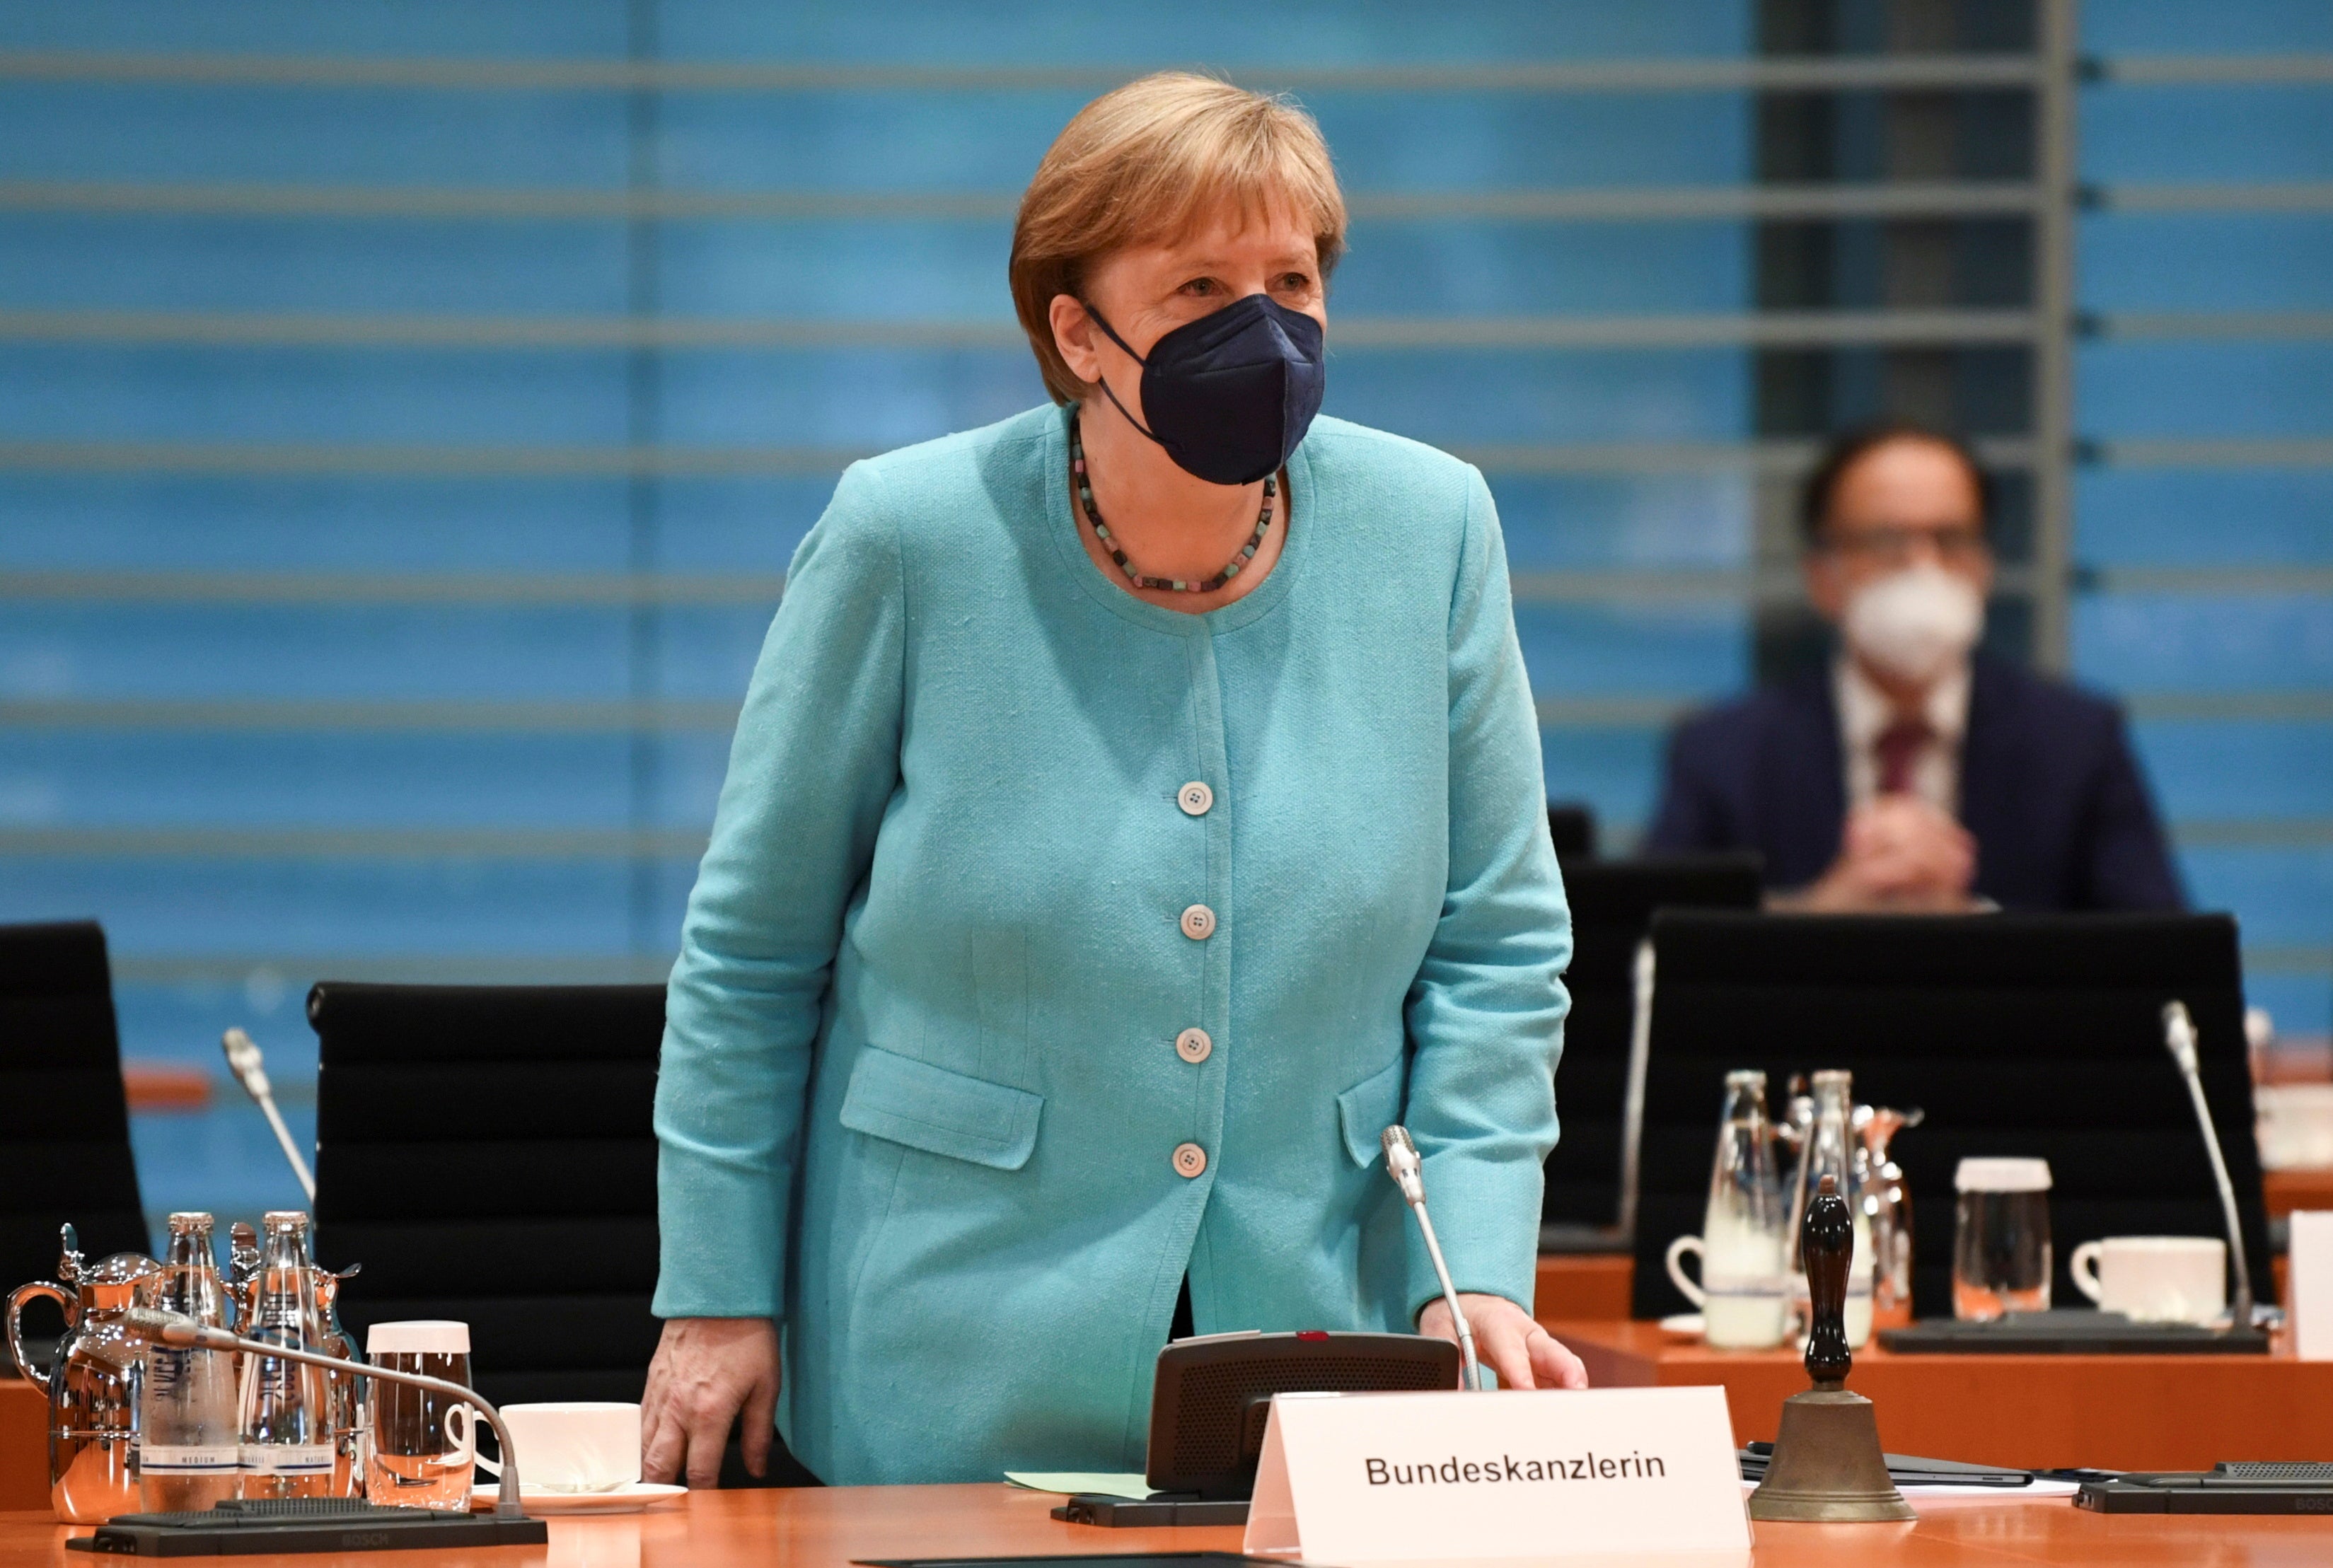 German Chancellor Angela Merkel attends the weekly cabinet meeting at the Chancellery in Berlin, Germany, 14 July 2021